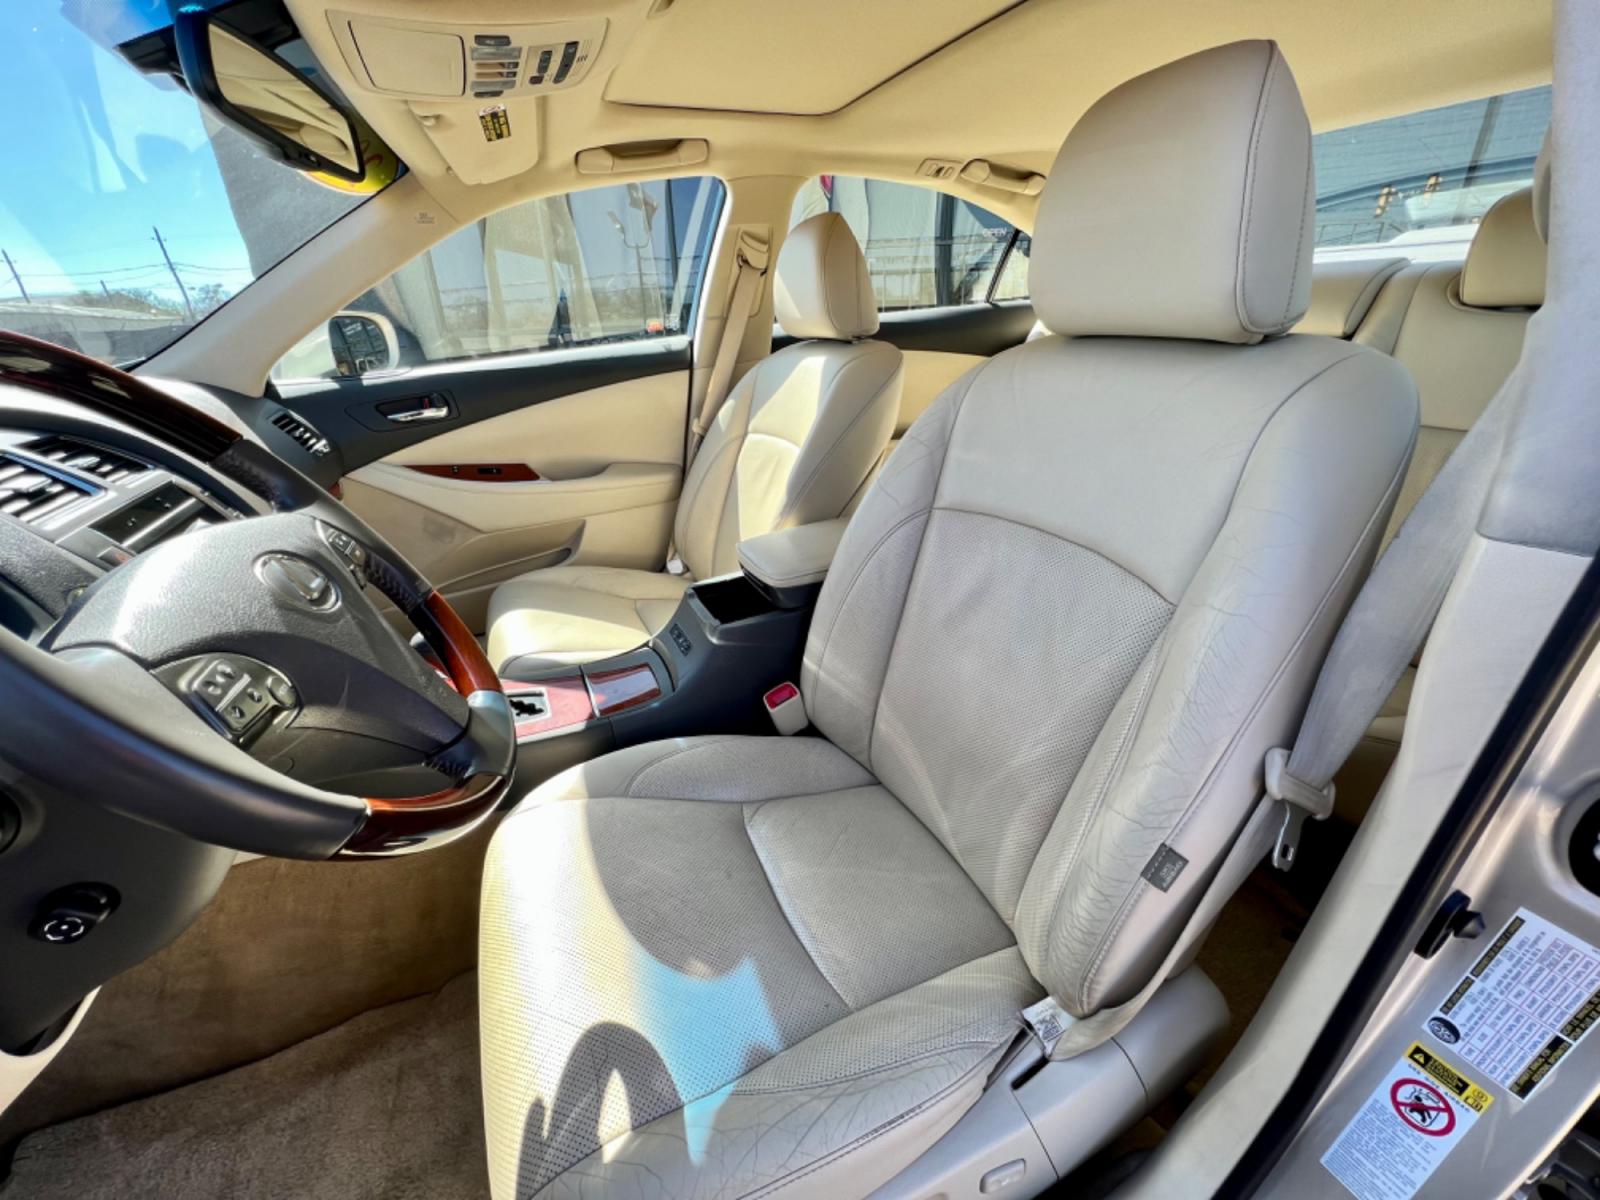 2011 GOLD LEXUS ES 350 (JTHBK1EG9B2) , located at 5900 E. Lancaster Ave., Fort Worth, TX, 76112, (817) 457-5456, 0.000000, 0.000000 - This is a 1 OWNER, 2011 LEXUS ES 350 4 DOOR SEDAN that is in excellent condition. There are no dents or scratches. The interior is clean with no rips or tears or stains. All power windows, door locks and seats. Ice cold AC for those hot Texas summer days. It is equipped with a CD player, AM/FM radio - Photo #9